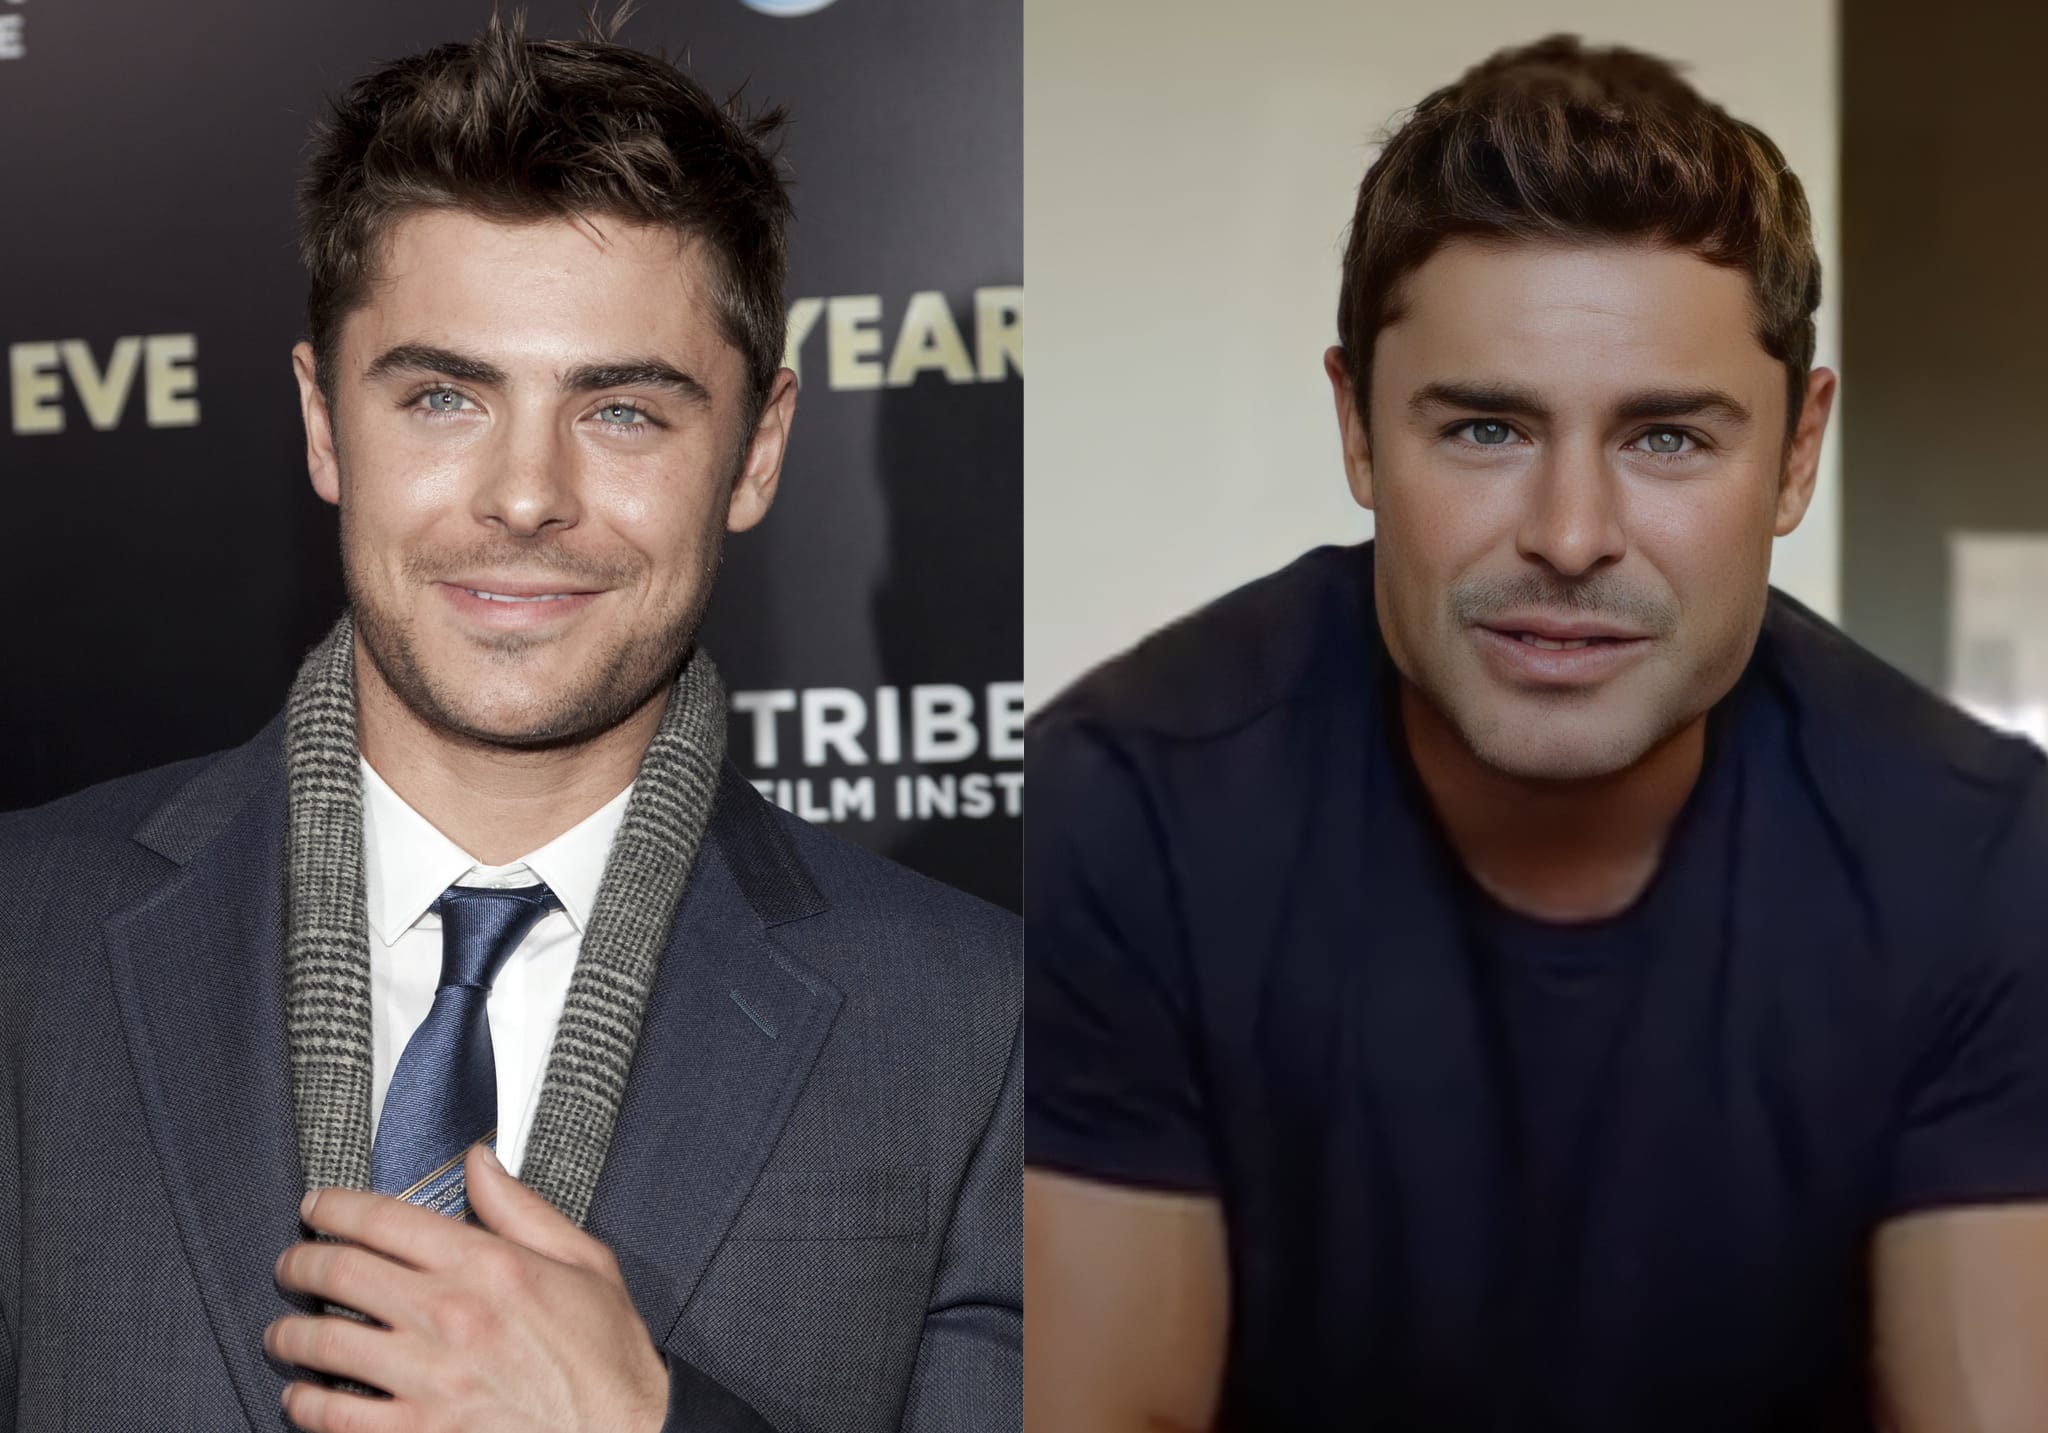 Zac Efron, pictured in 2011 (L) and 2021 (R), is rumored to have undergone plastic surgery on his jawline and lips